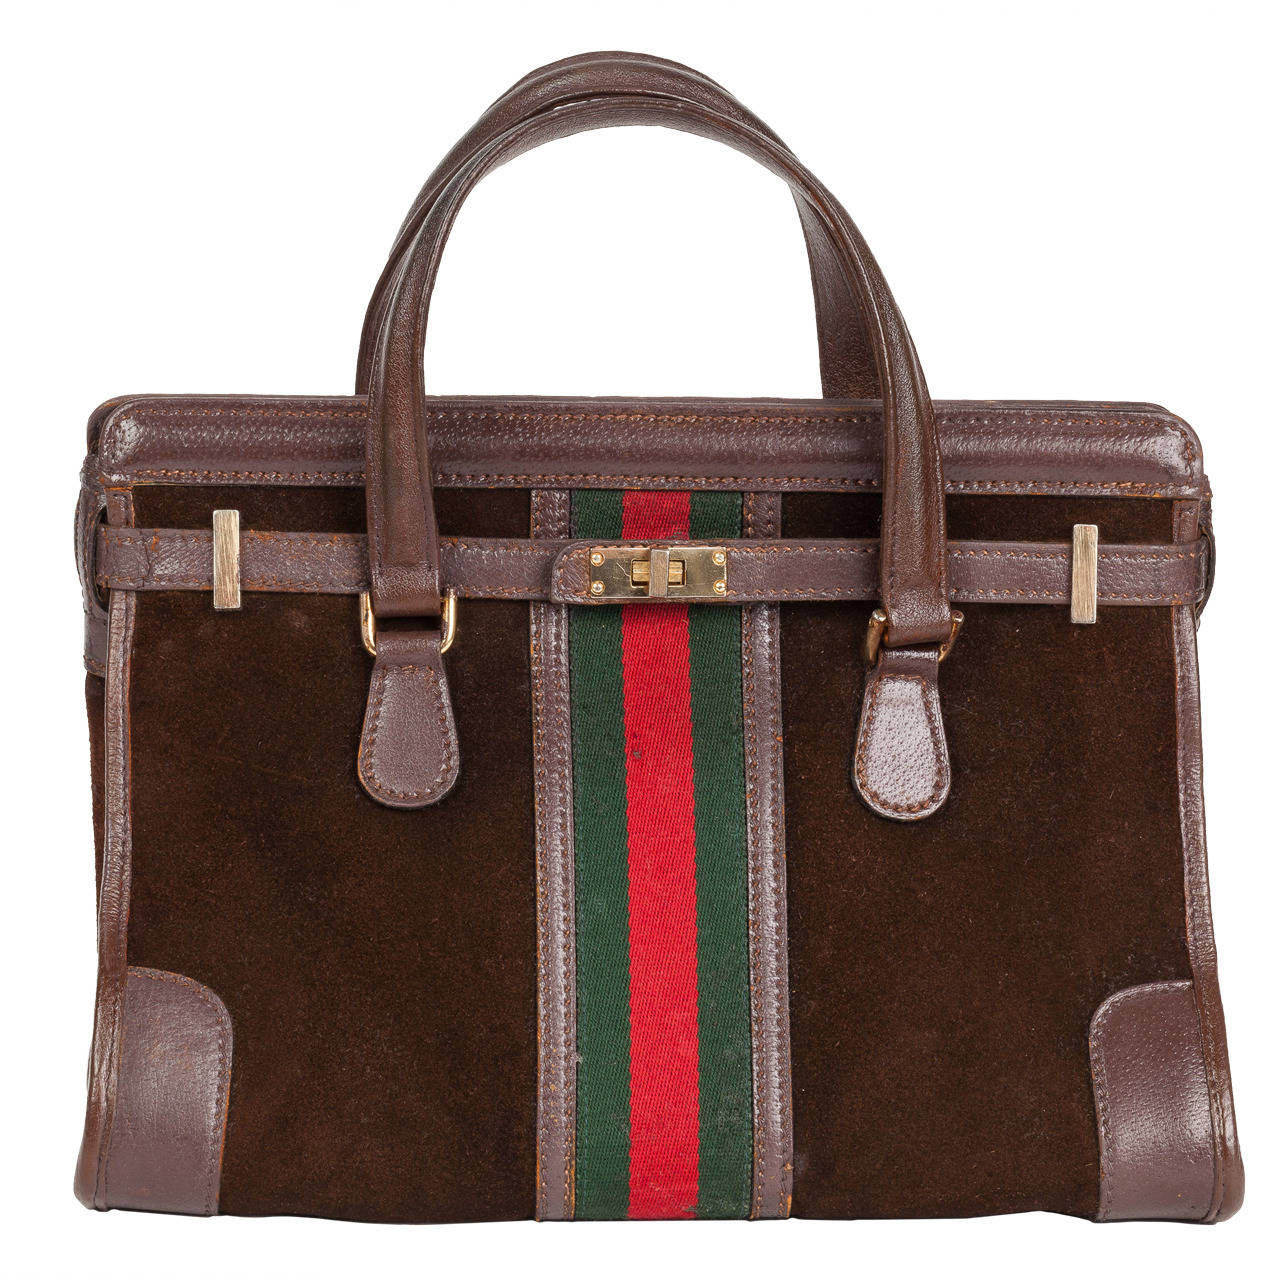 Rare 1970s Gucci Brown Suede Doctor's Bag Handbag w/Iconic Gucci Racer Stripe